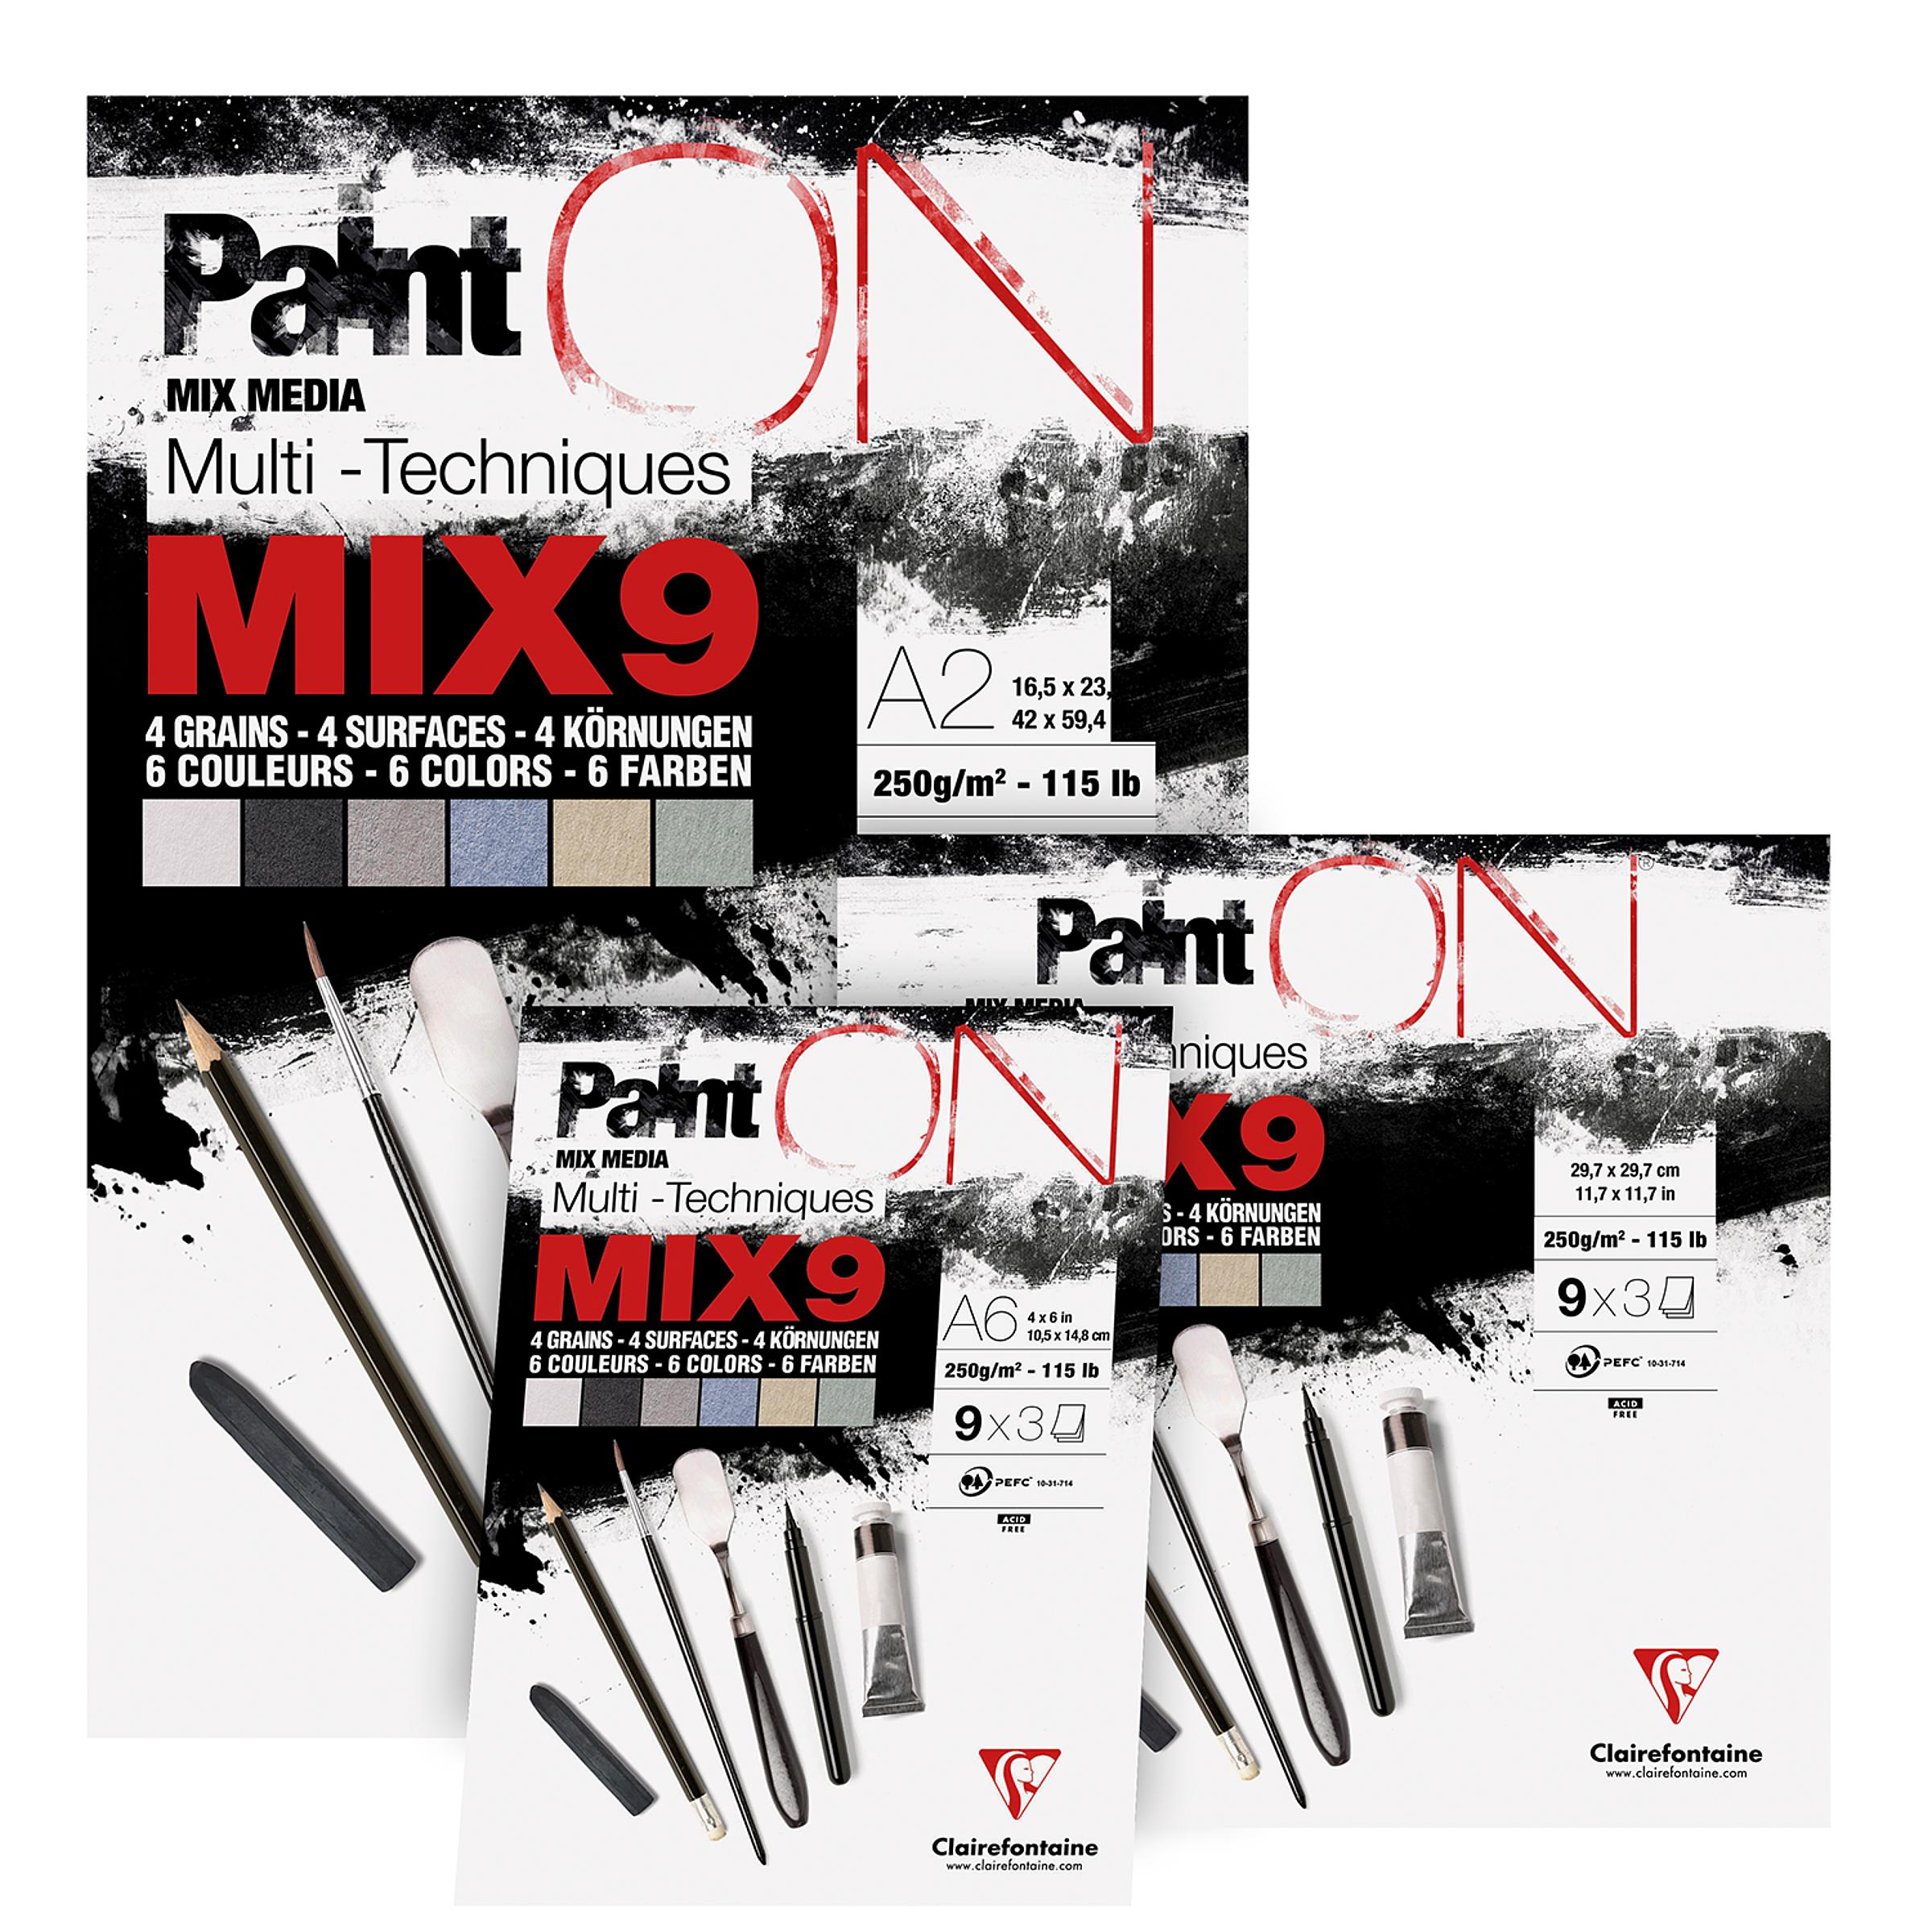 Clirefontaine PaintON Mixed Media Pad - Mix9 - A3